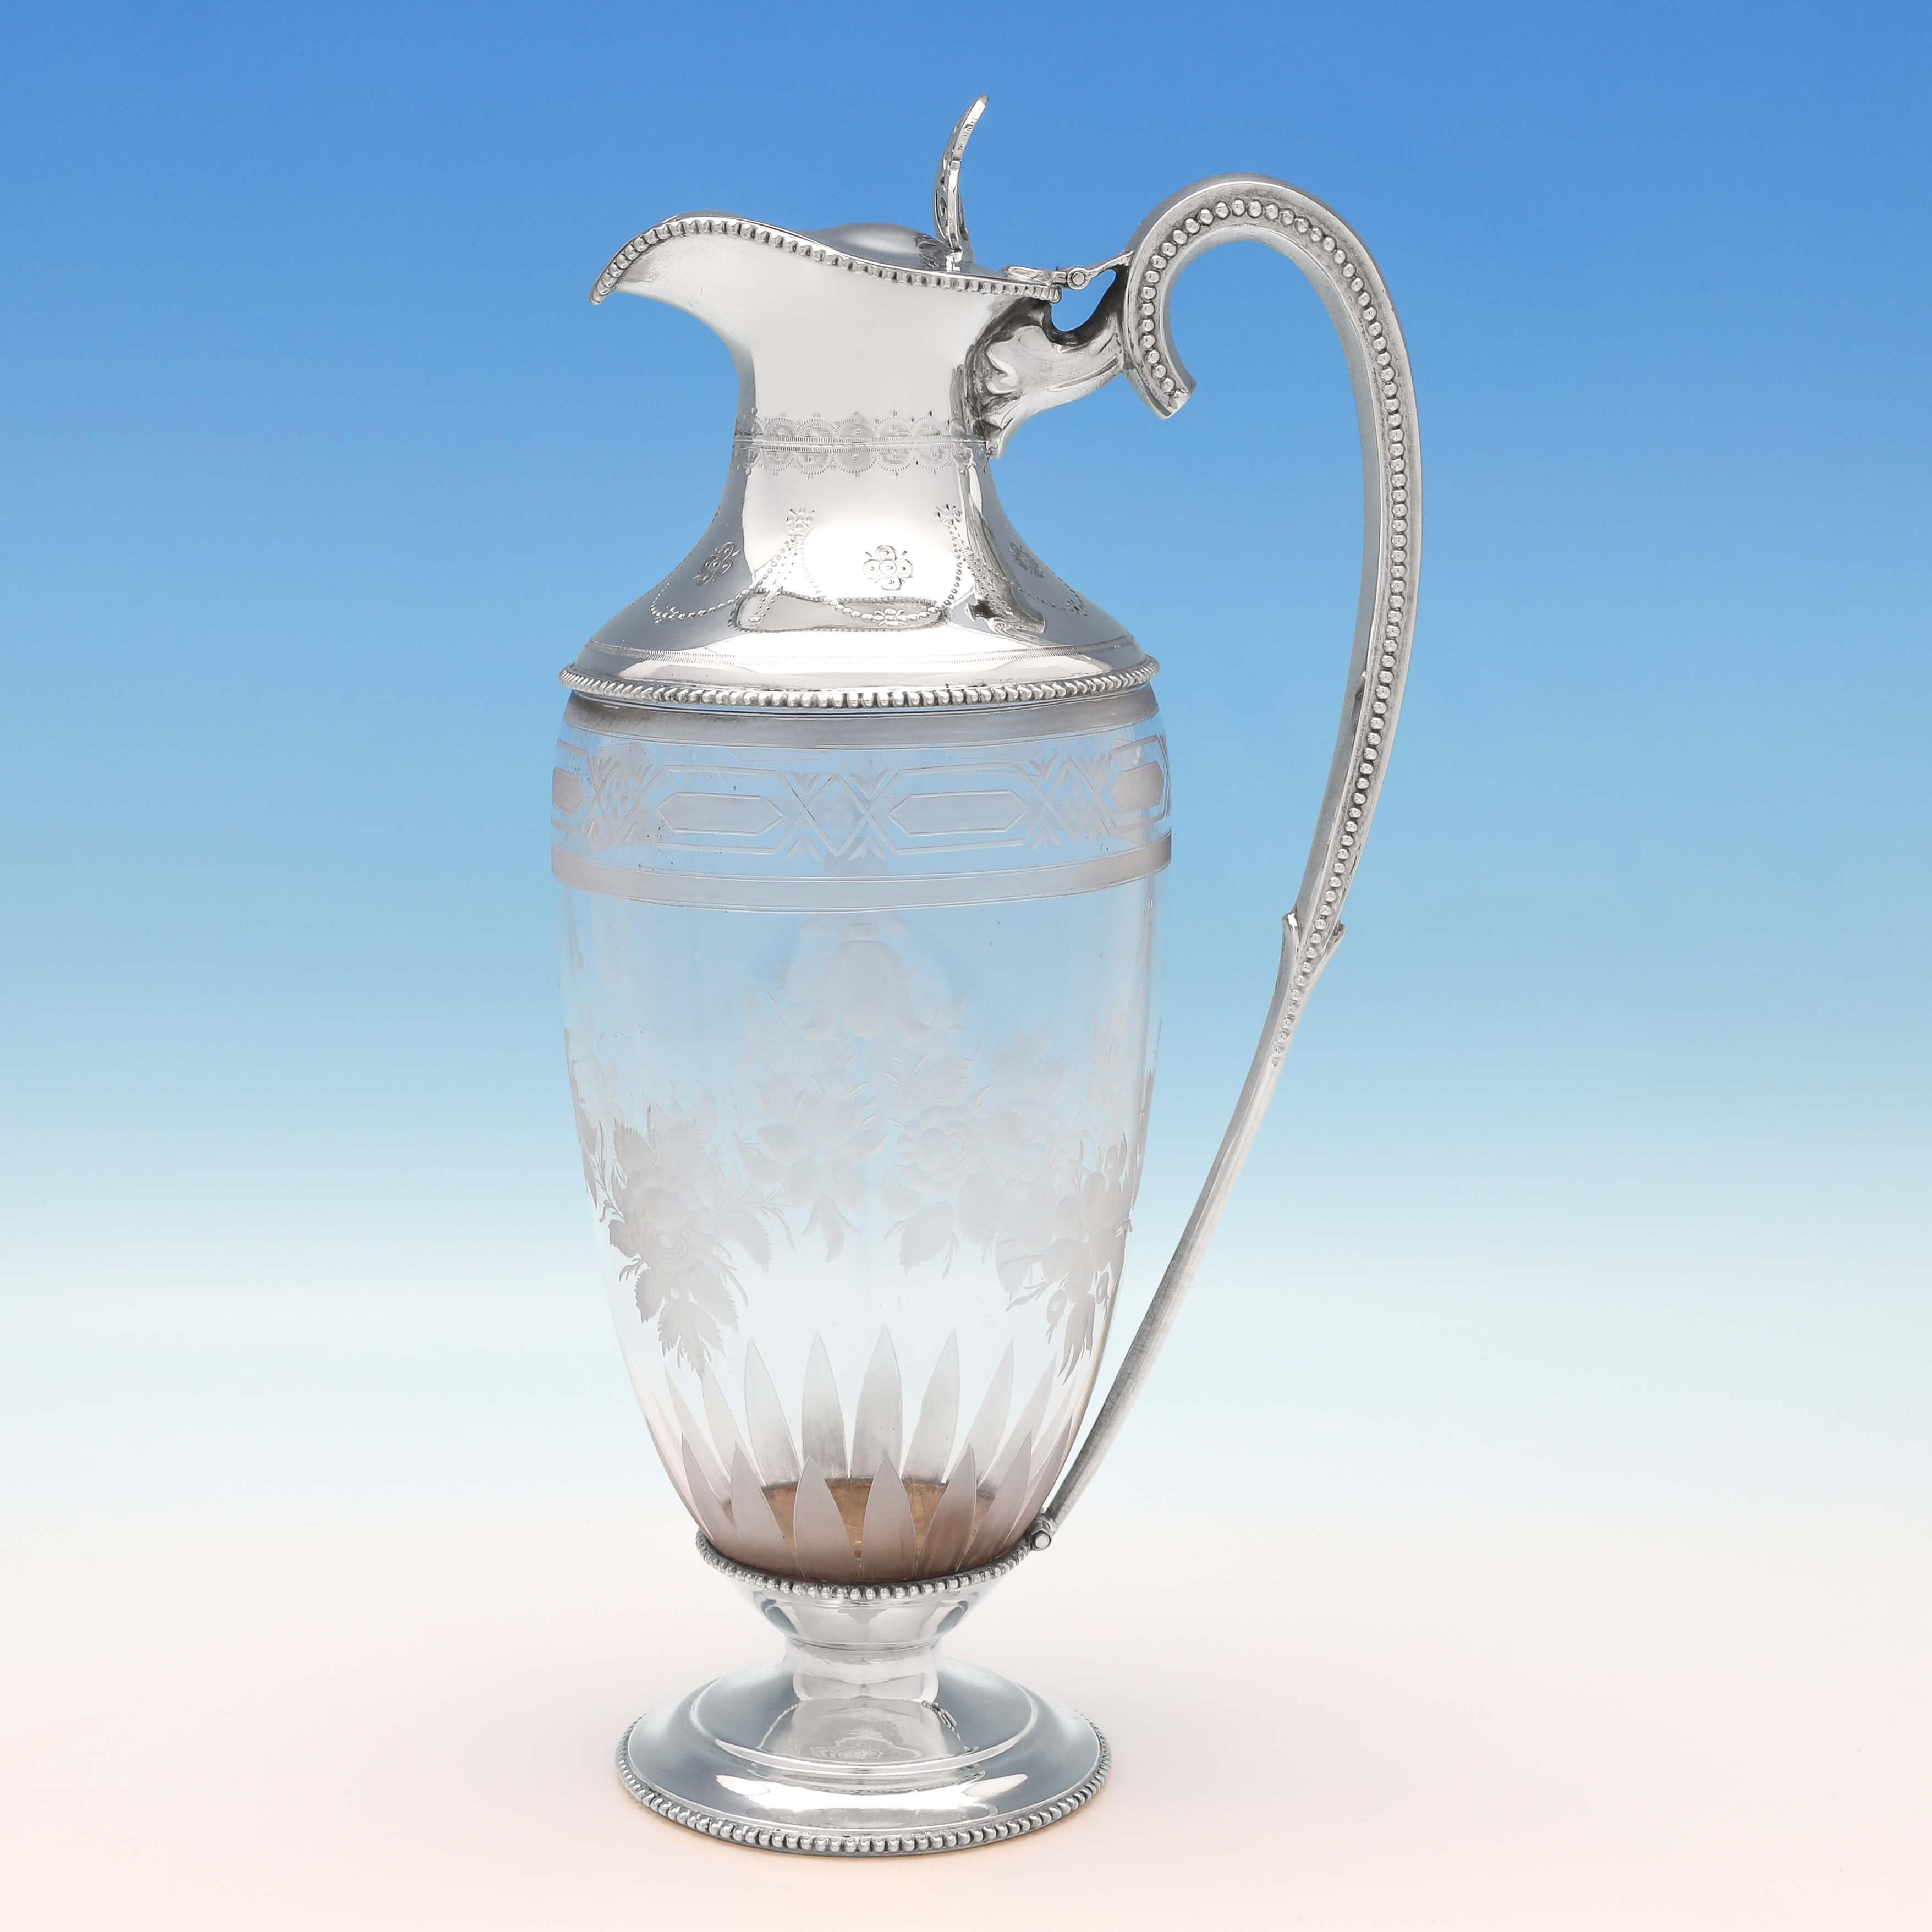 Hallmarked in London in 1868 by William & George Sissons, this attractive, Victorian, Antique Sterling Silver Claret Jug, is urn shaped, and features floral etched glass and a bright cut engraved mount, with bead borders. The claret jug measures